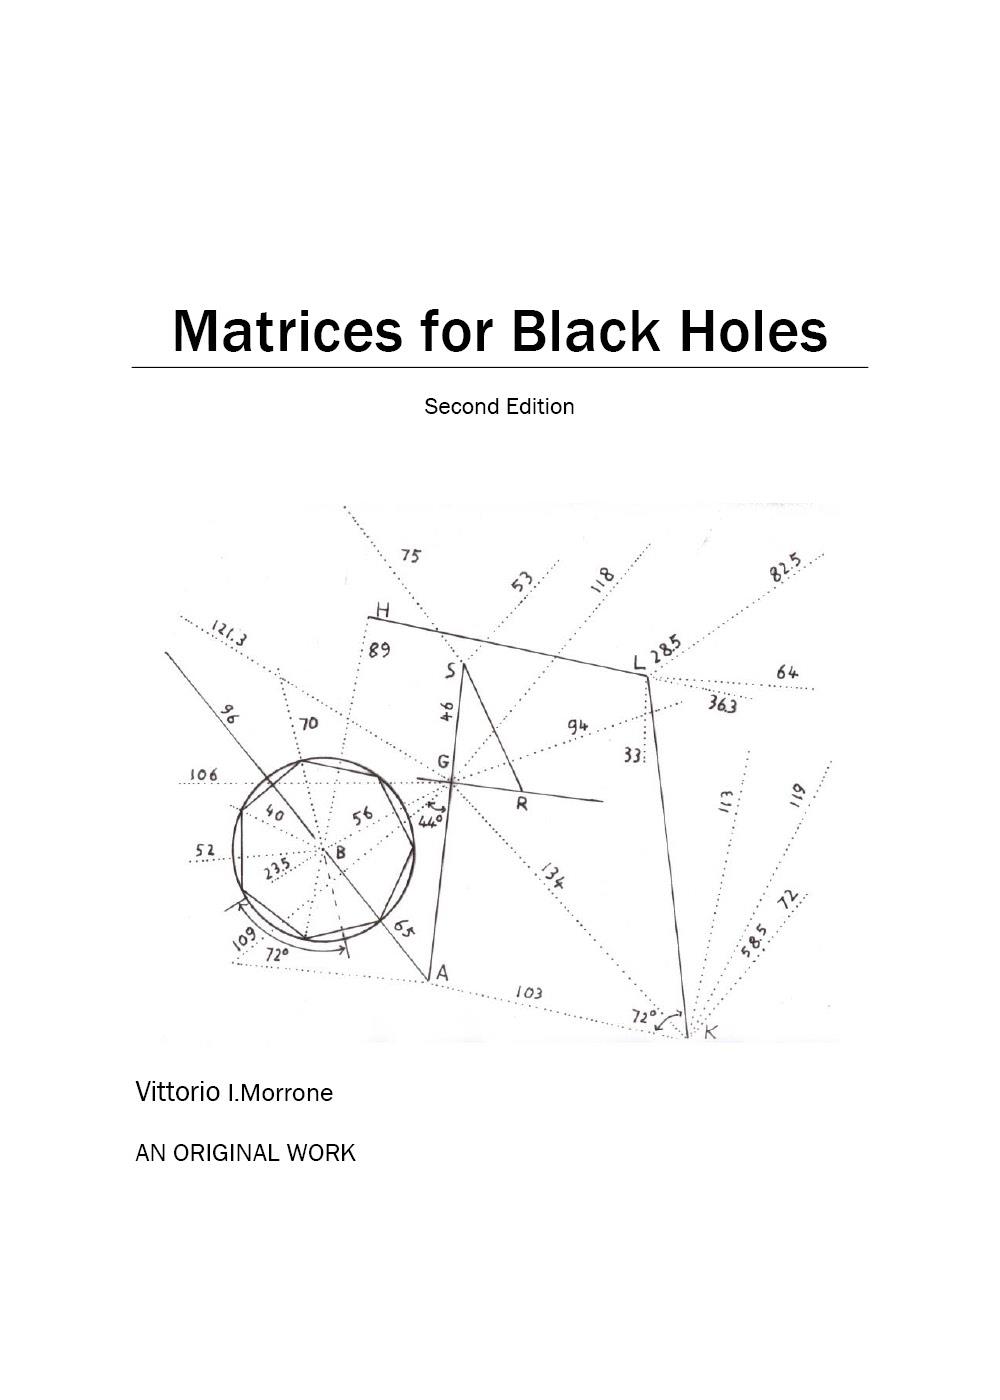 Matrices. Second Edition